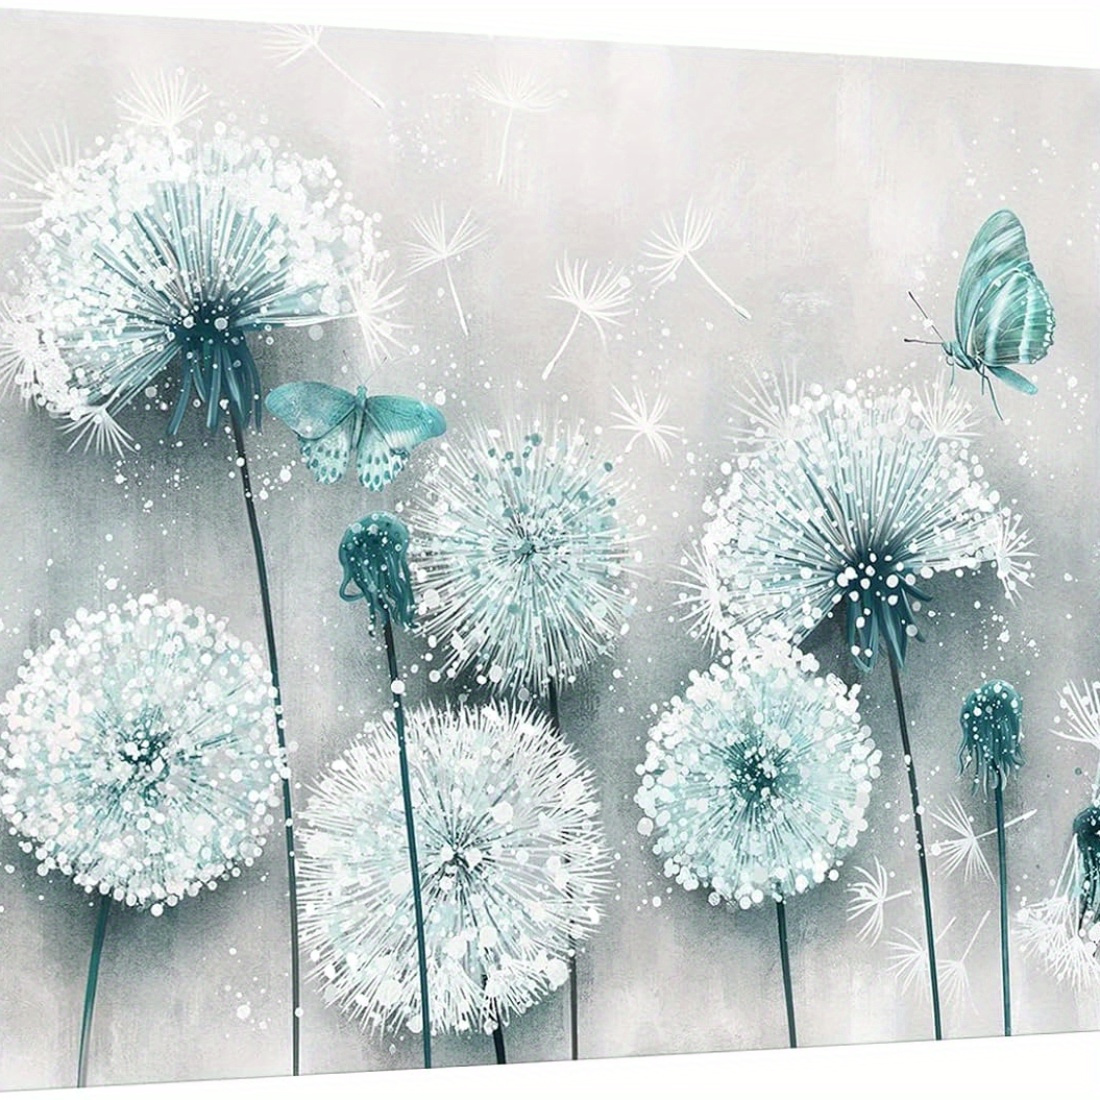 

Captivating Teal Dandelion Canvas Art: Vibrant Butterflies & Blooming Dandelions For Bedroom, Kitchen, & Home Decor - Ready To Hang, 24*18inches